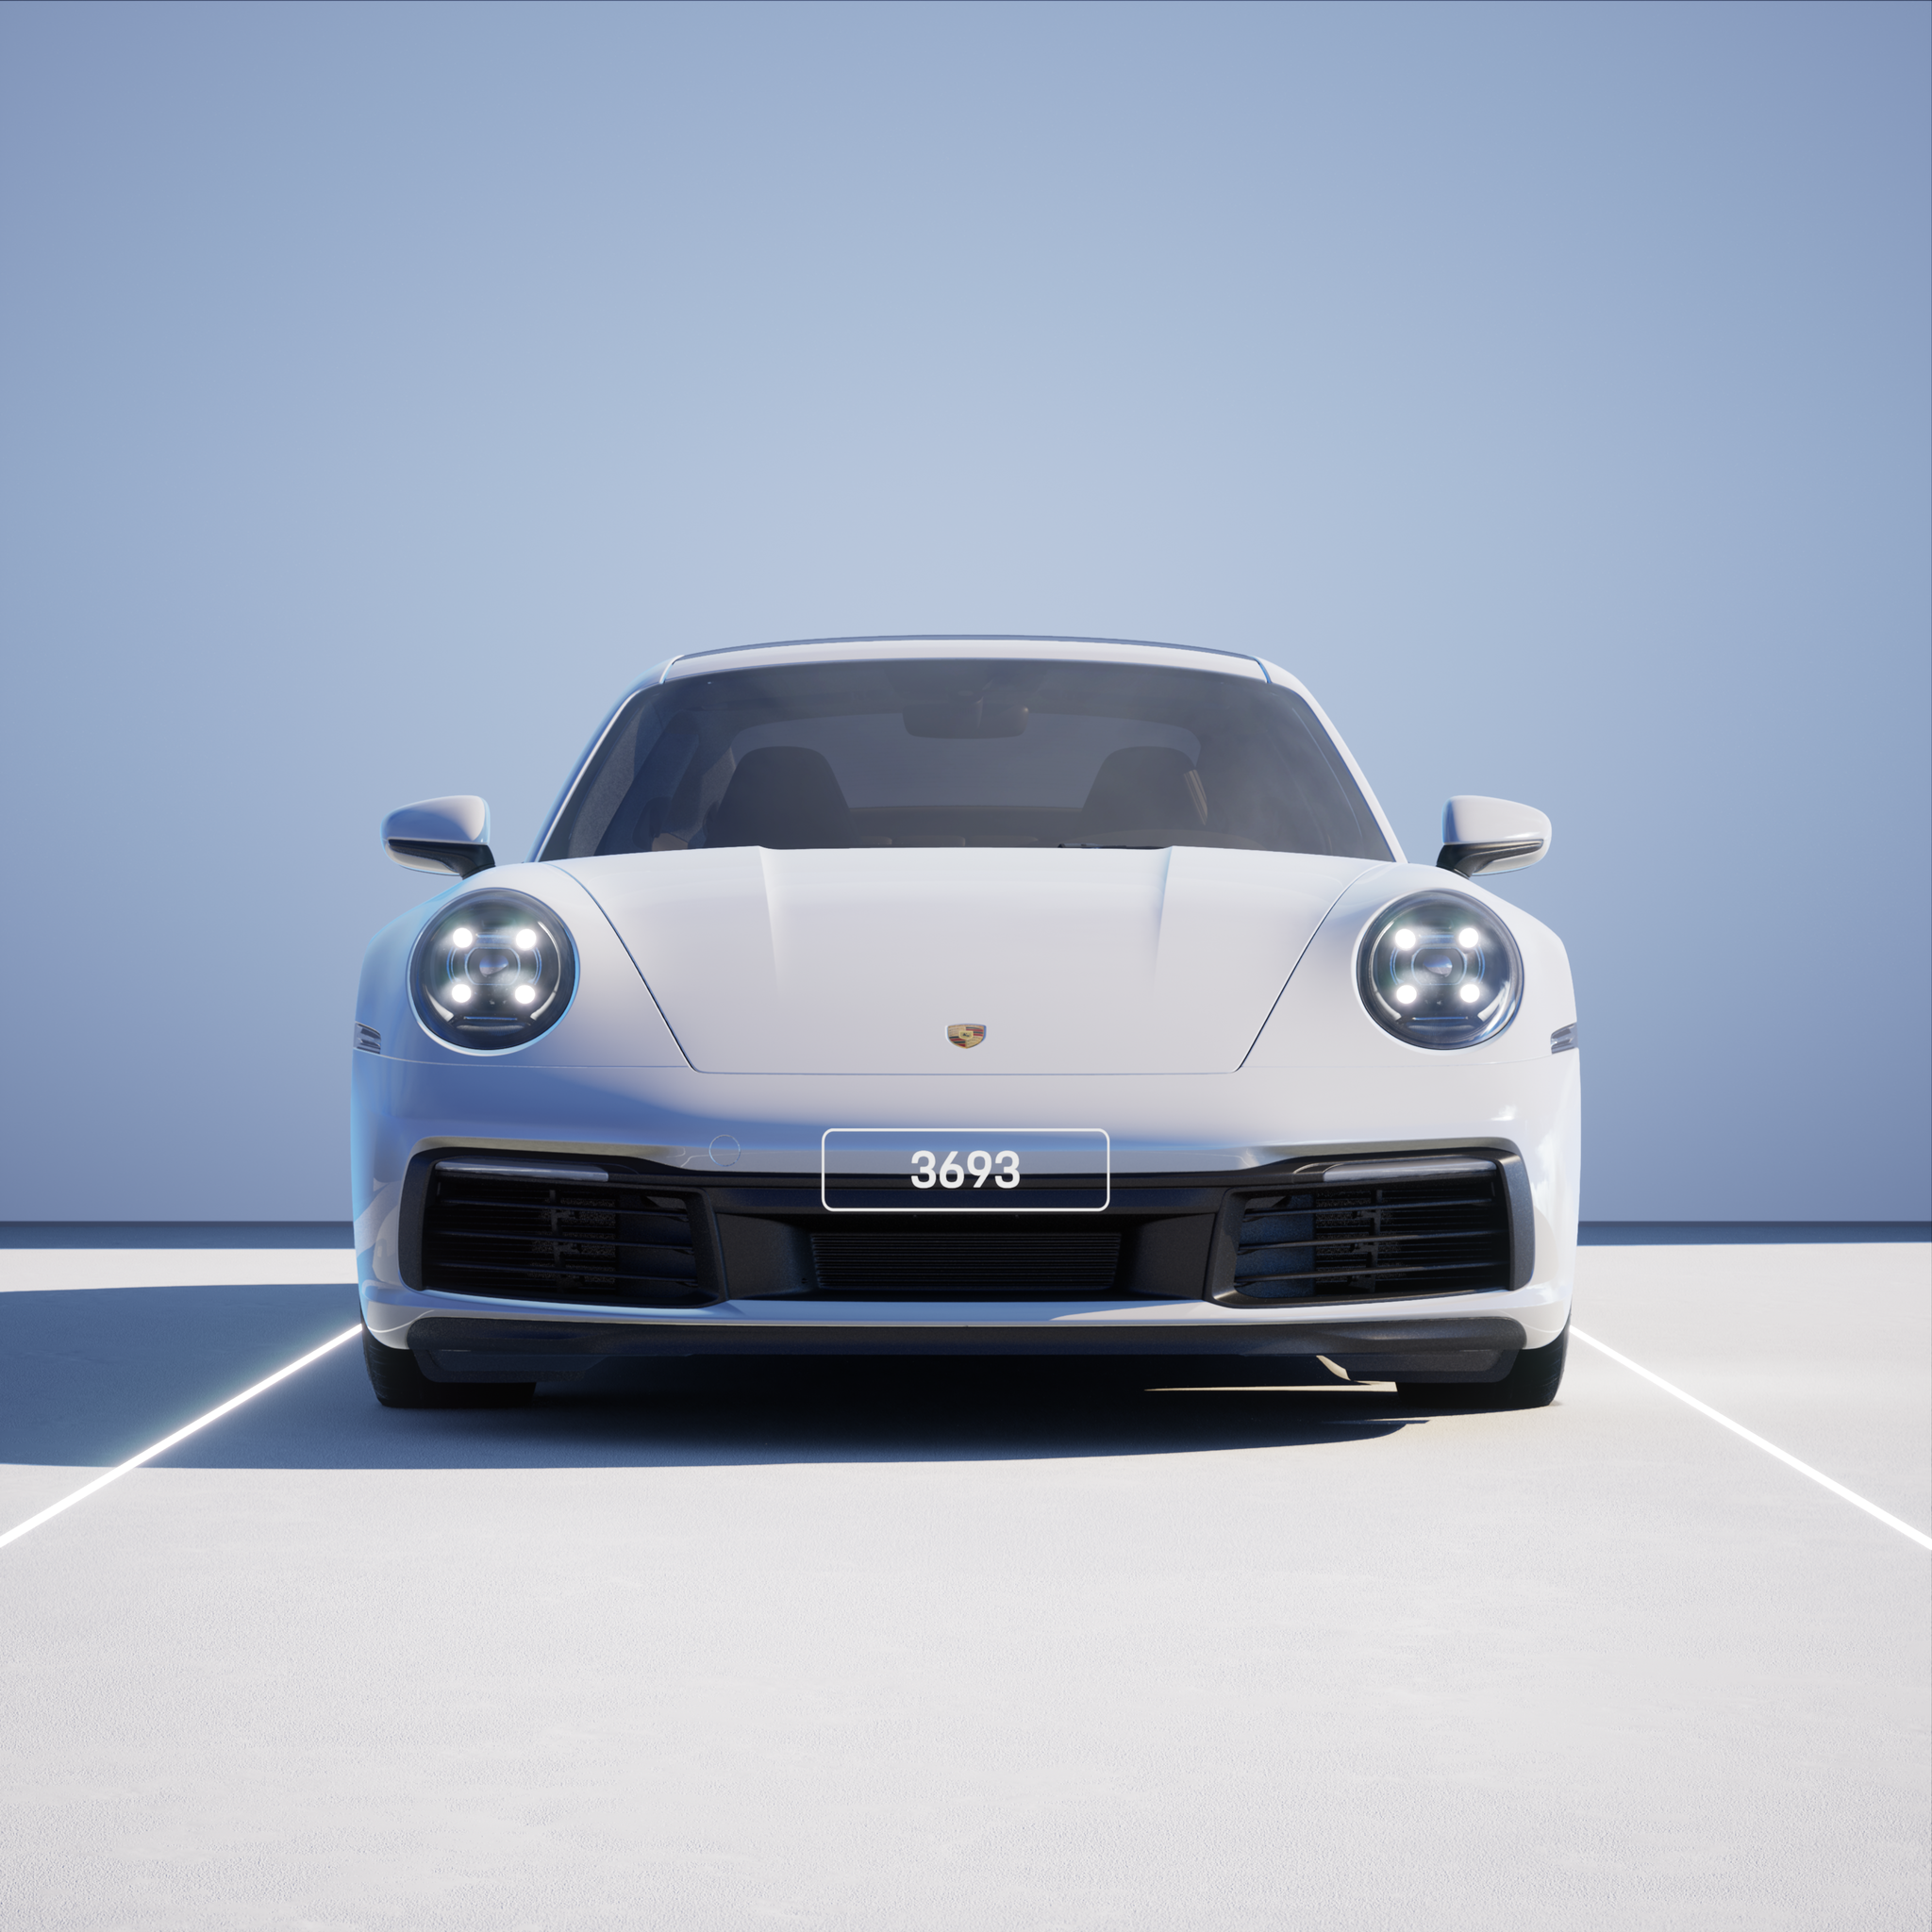 The PORSCHΞ 911 3693 image in phase